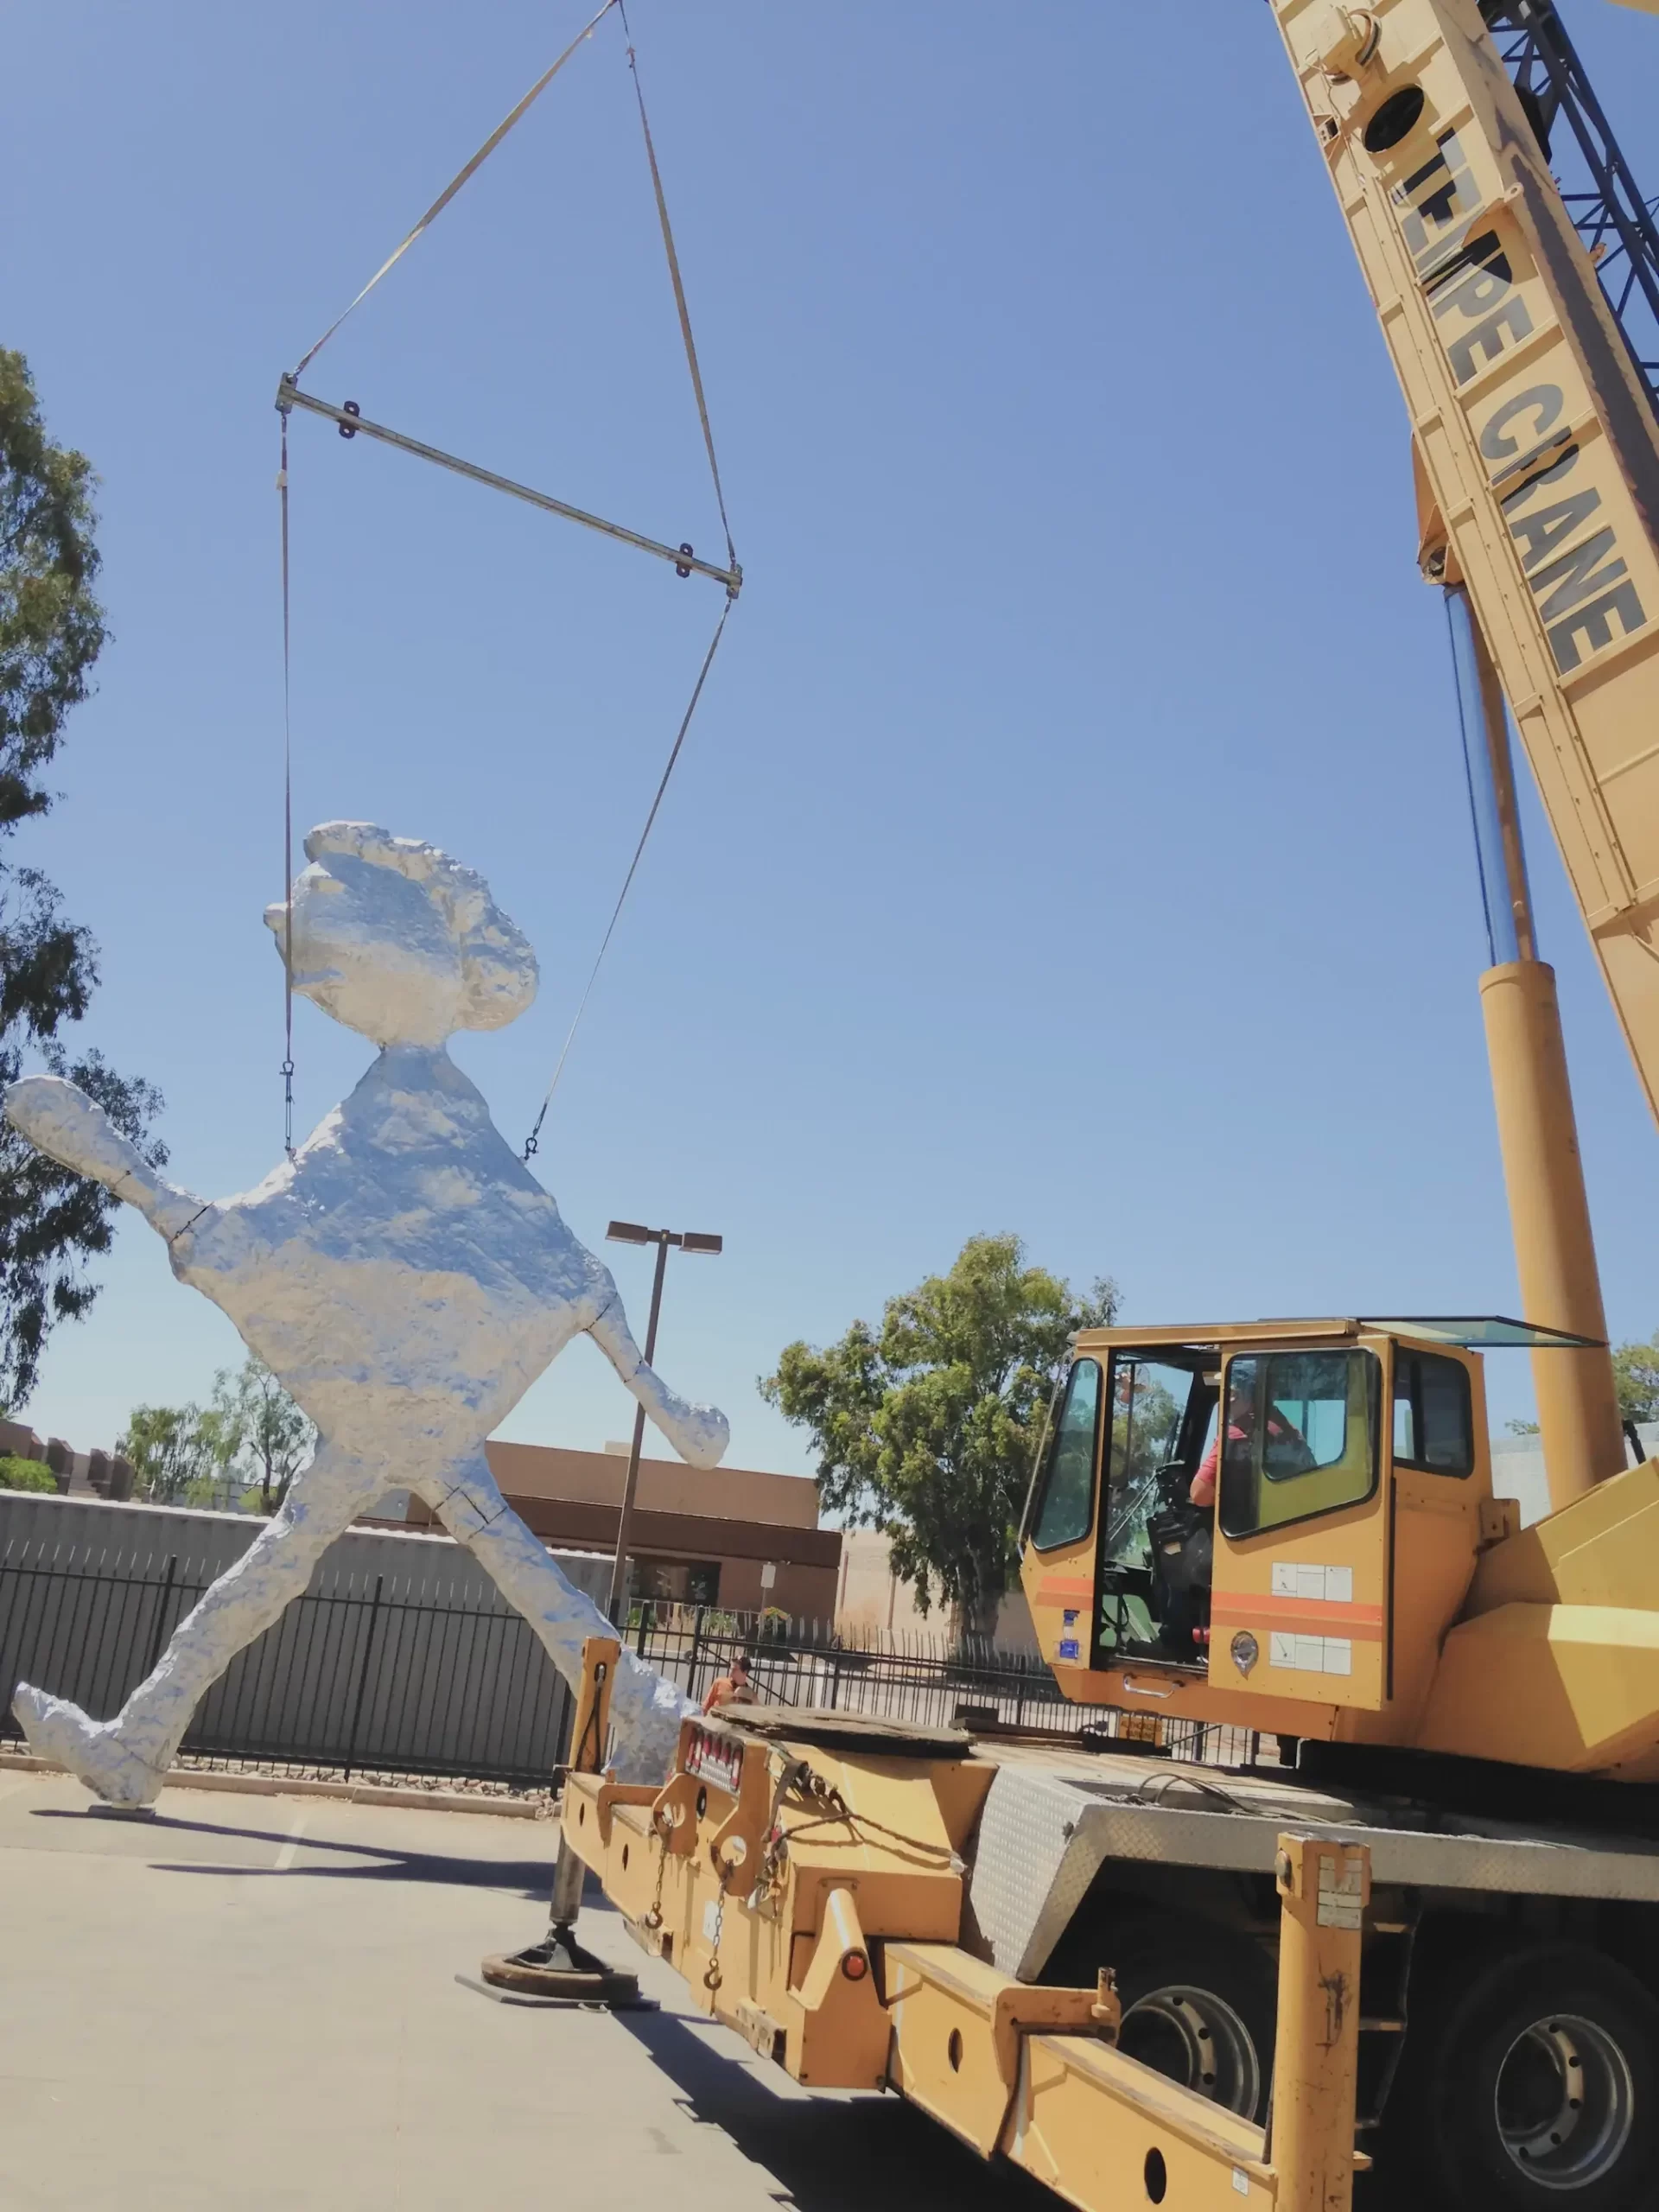 A crane carefully positions a large sculpture, highlighting our involvement in cultural projects.